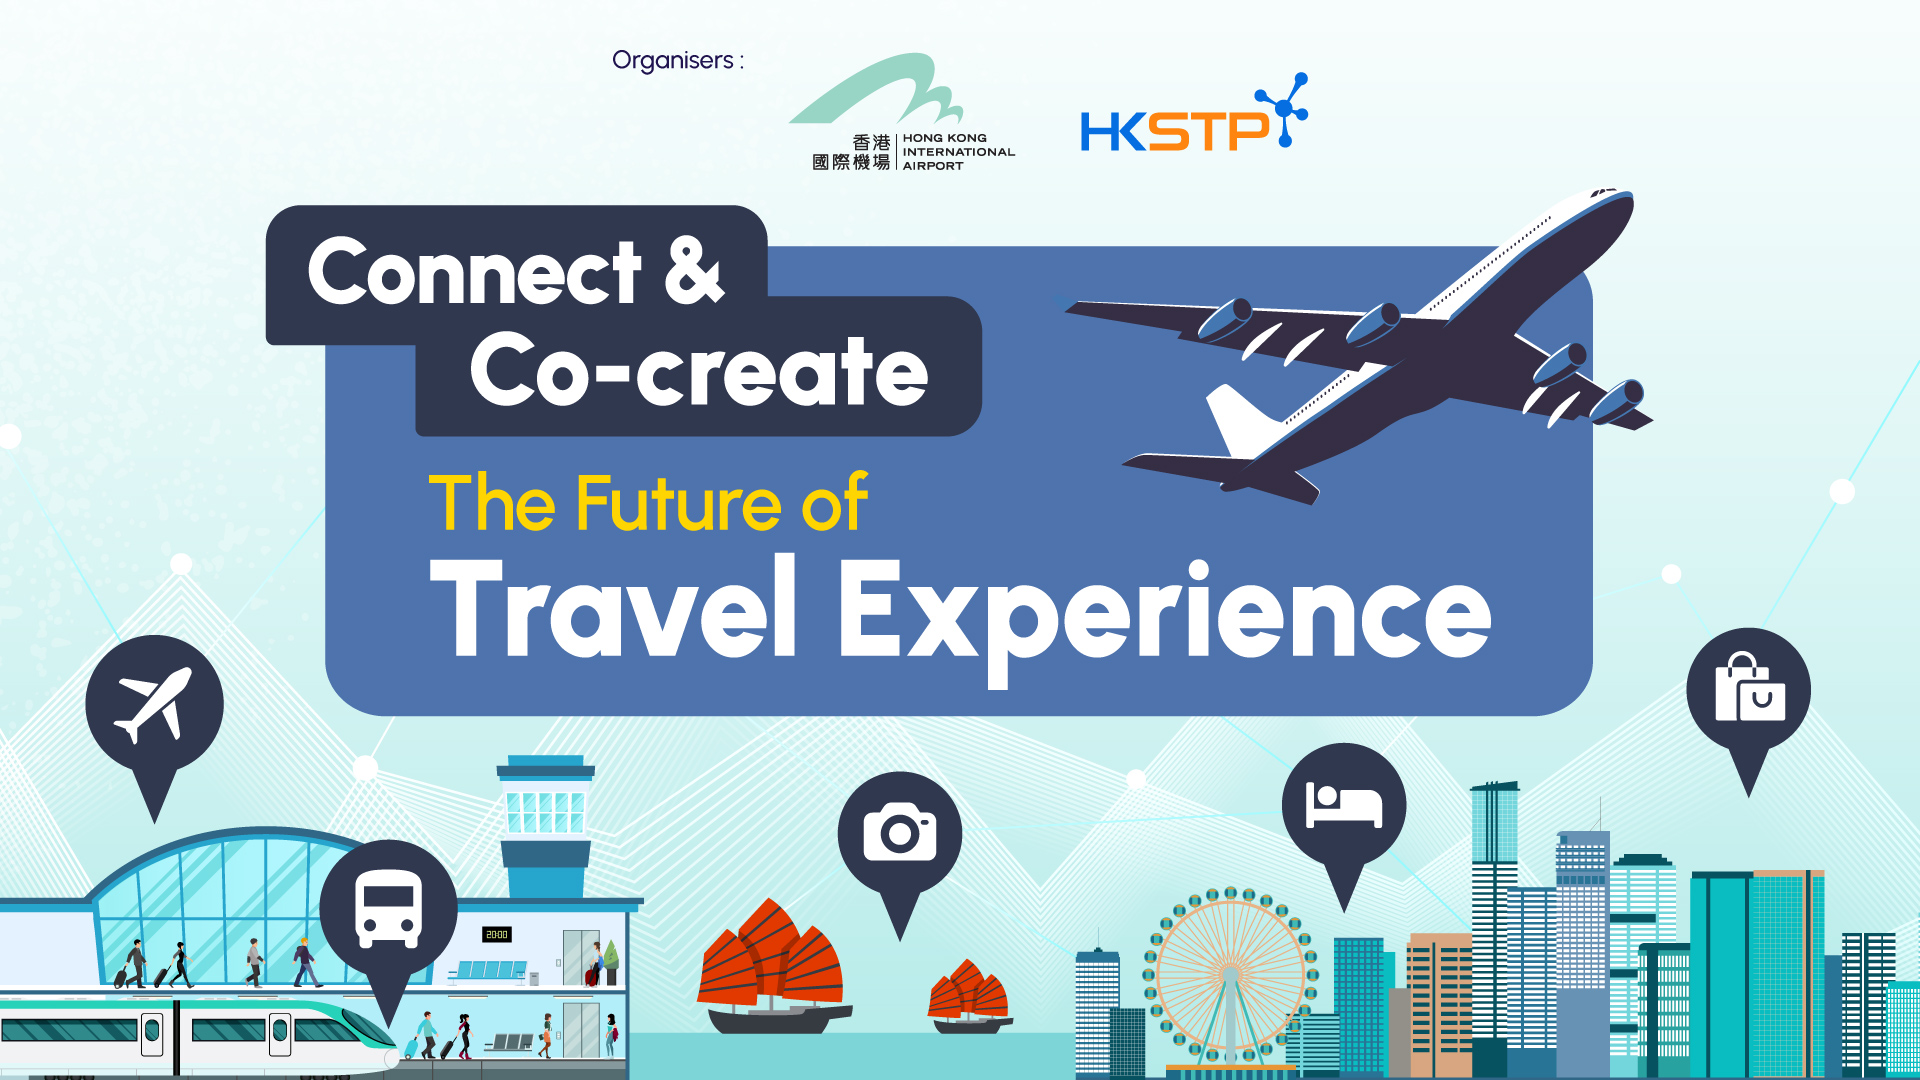 Connect & Co-create: The Future of Travel Experience